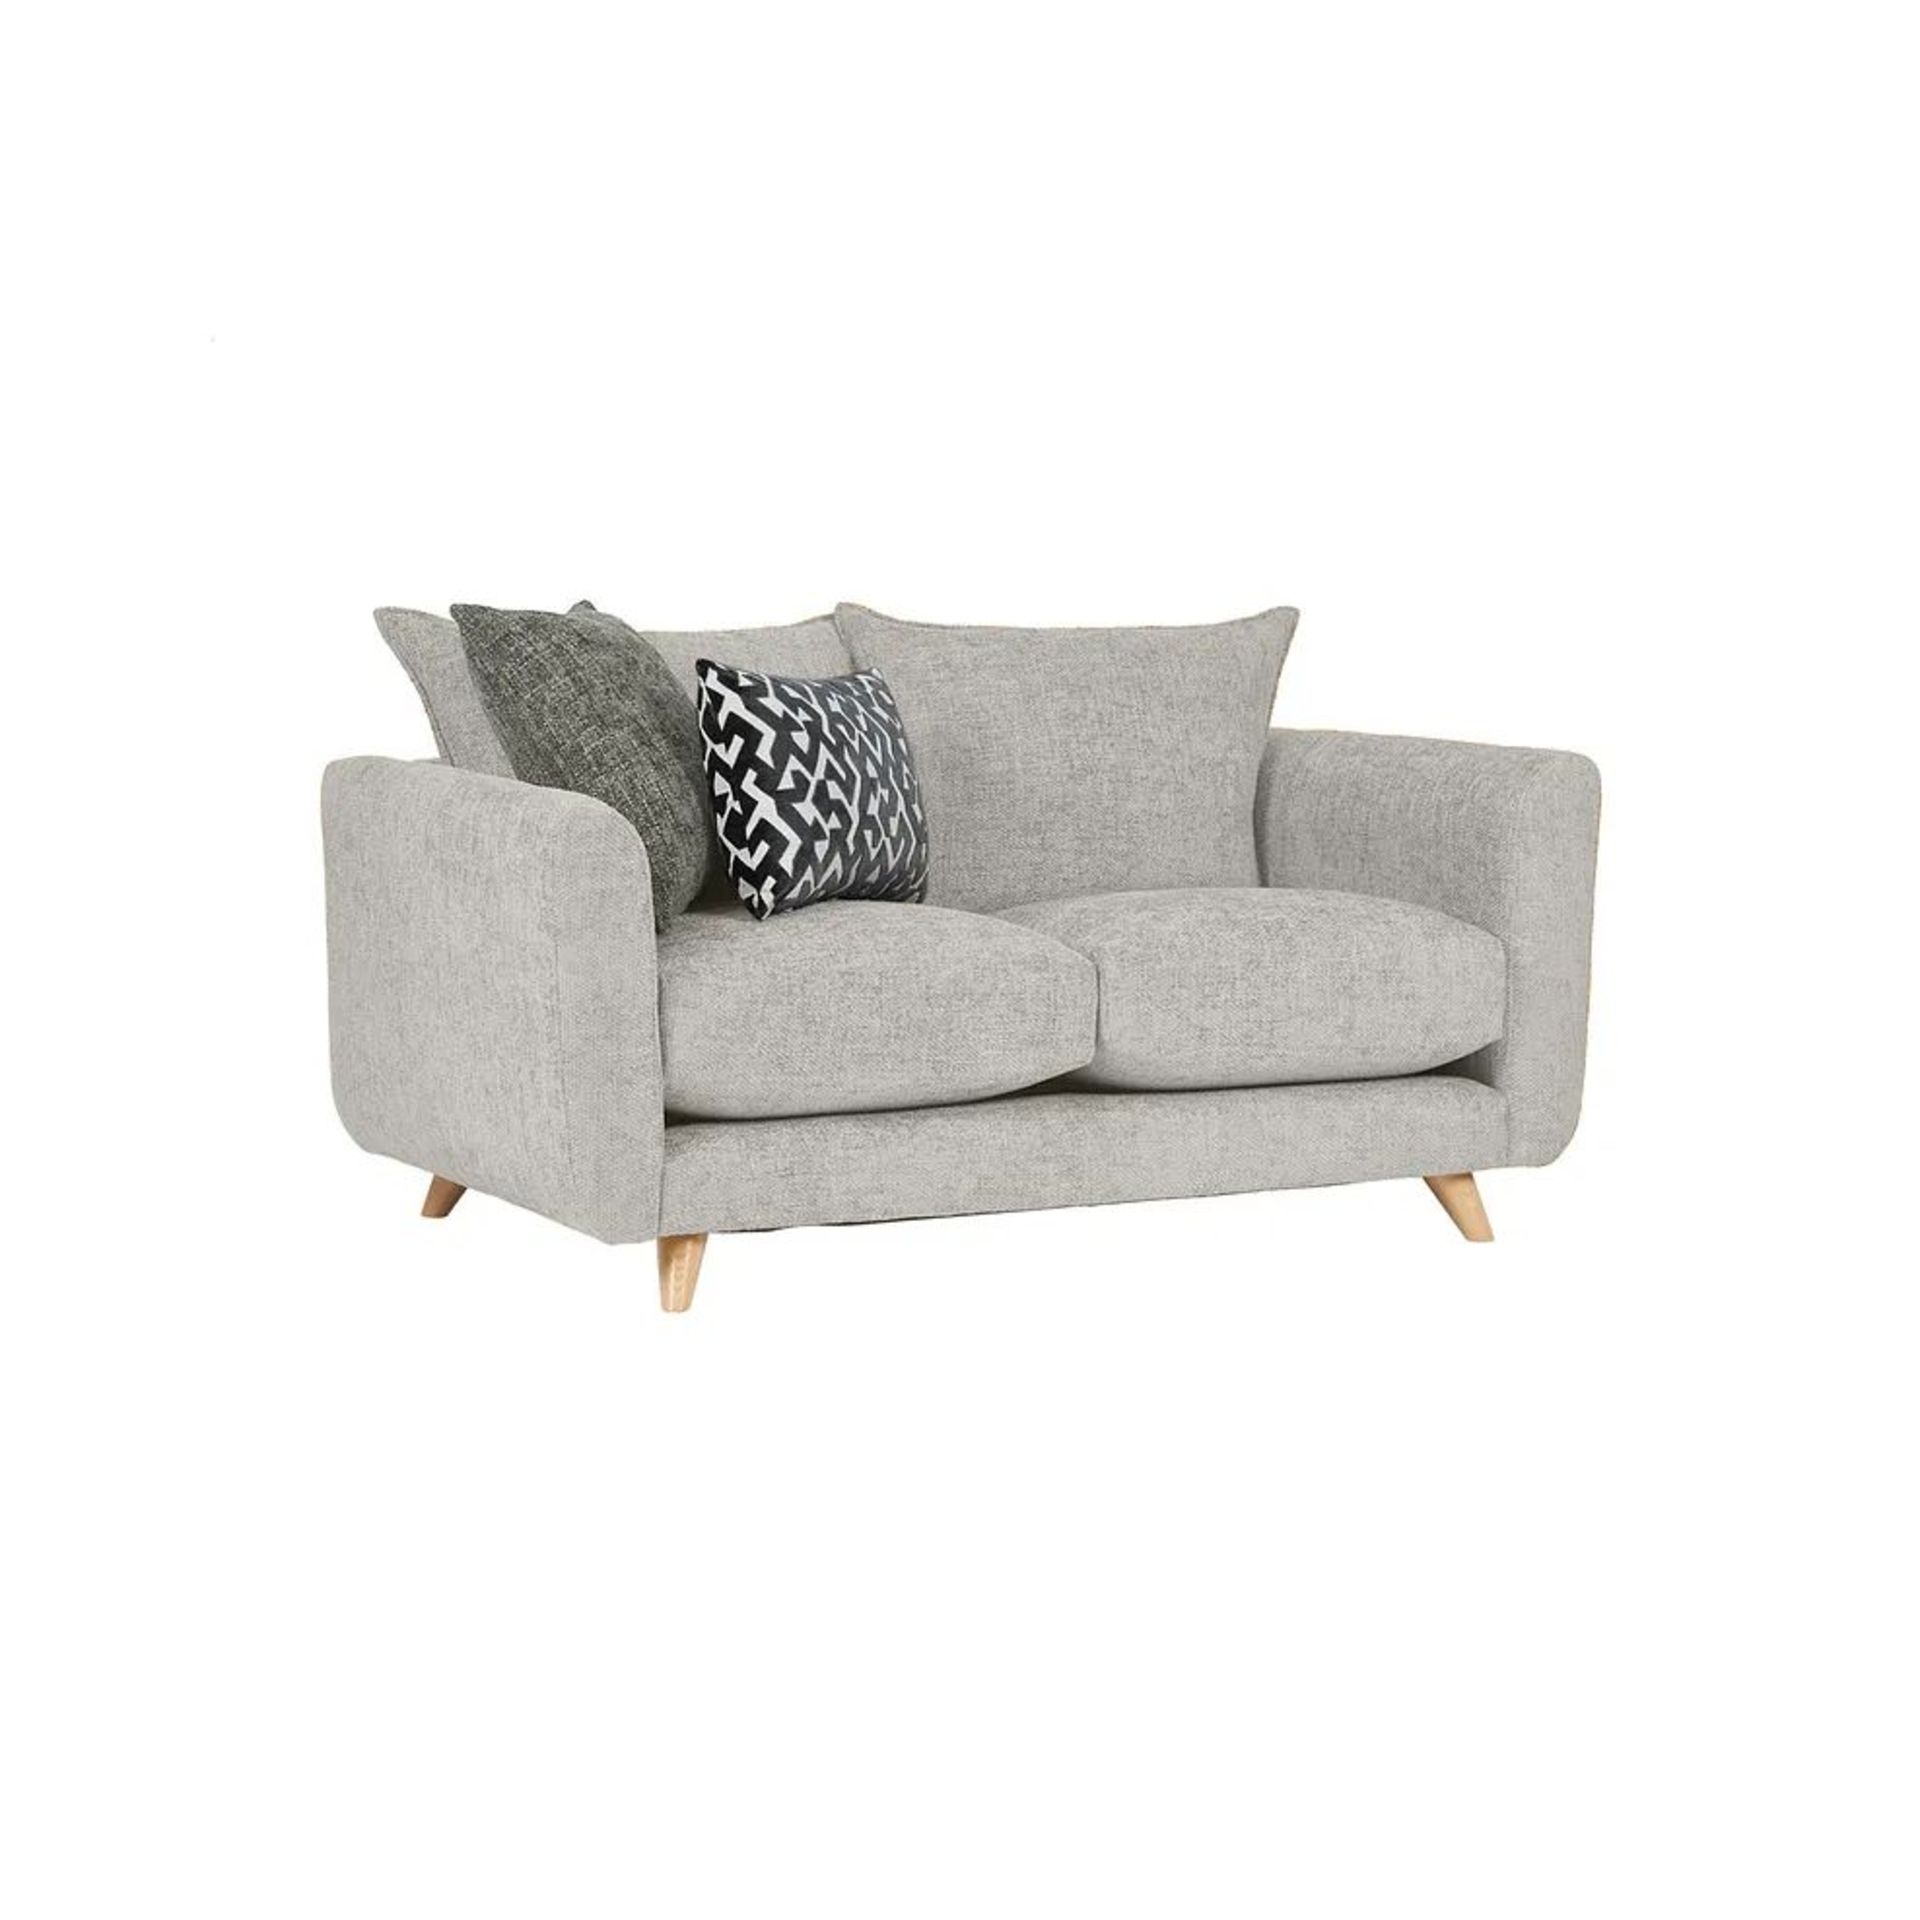 BRAND NEW DALBY 2 Seater Sofa - SILVER FABRIC. RRP £1569. Our Dalby 2-seater sofa, shown here in